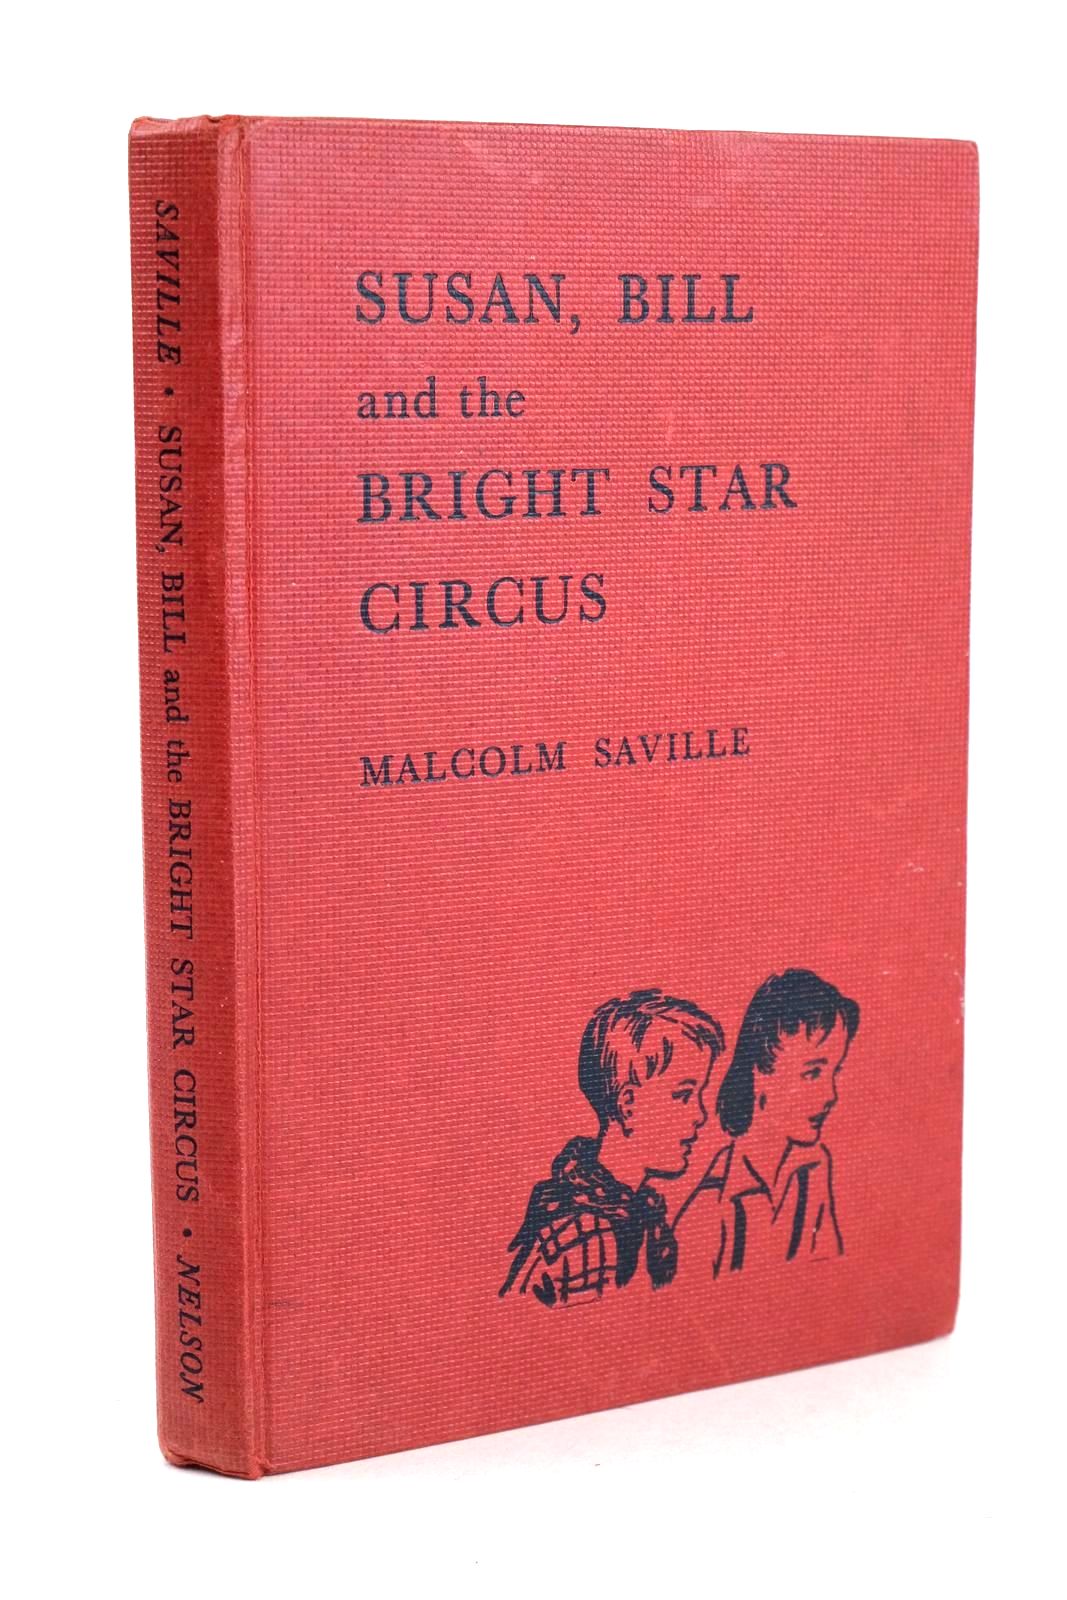 Photo of SUSAN, BILL AND THE BRIGHT STAR CIRCUS- Stock Number: 1326149